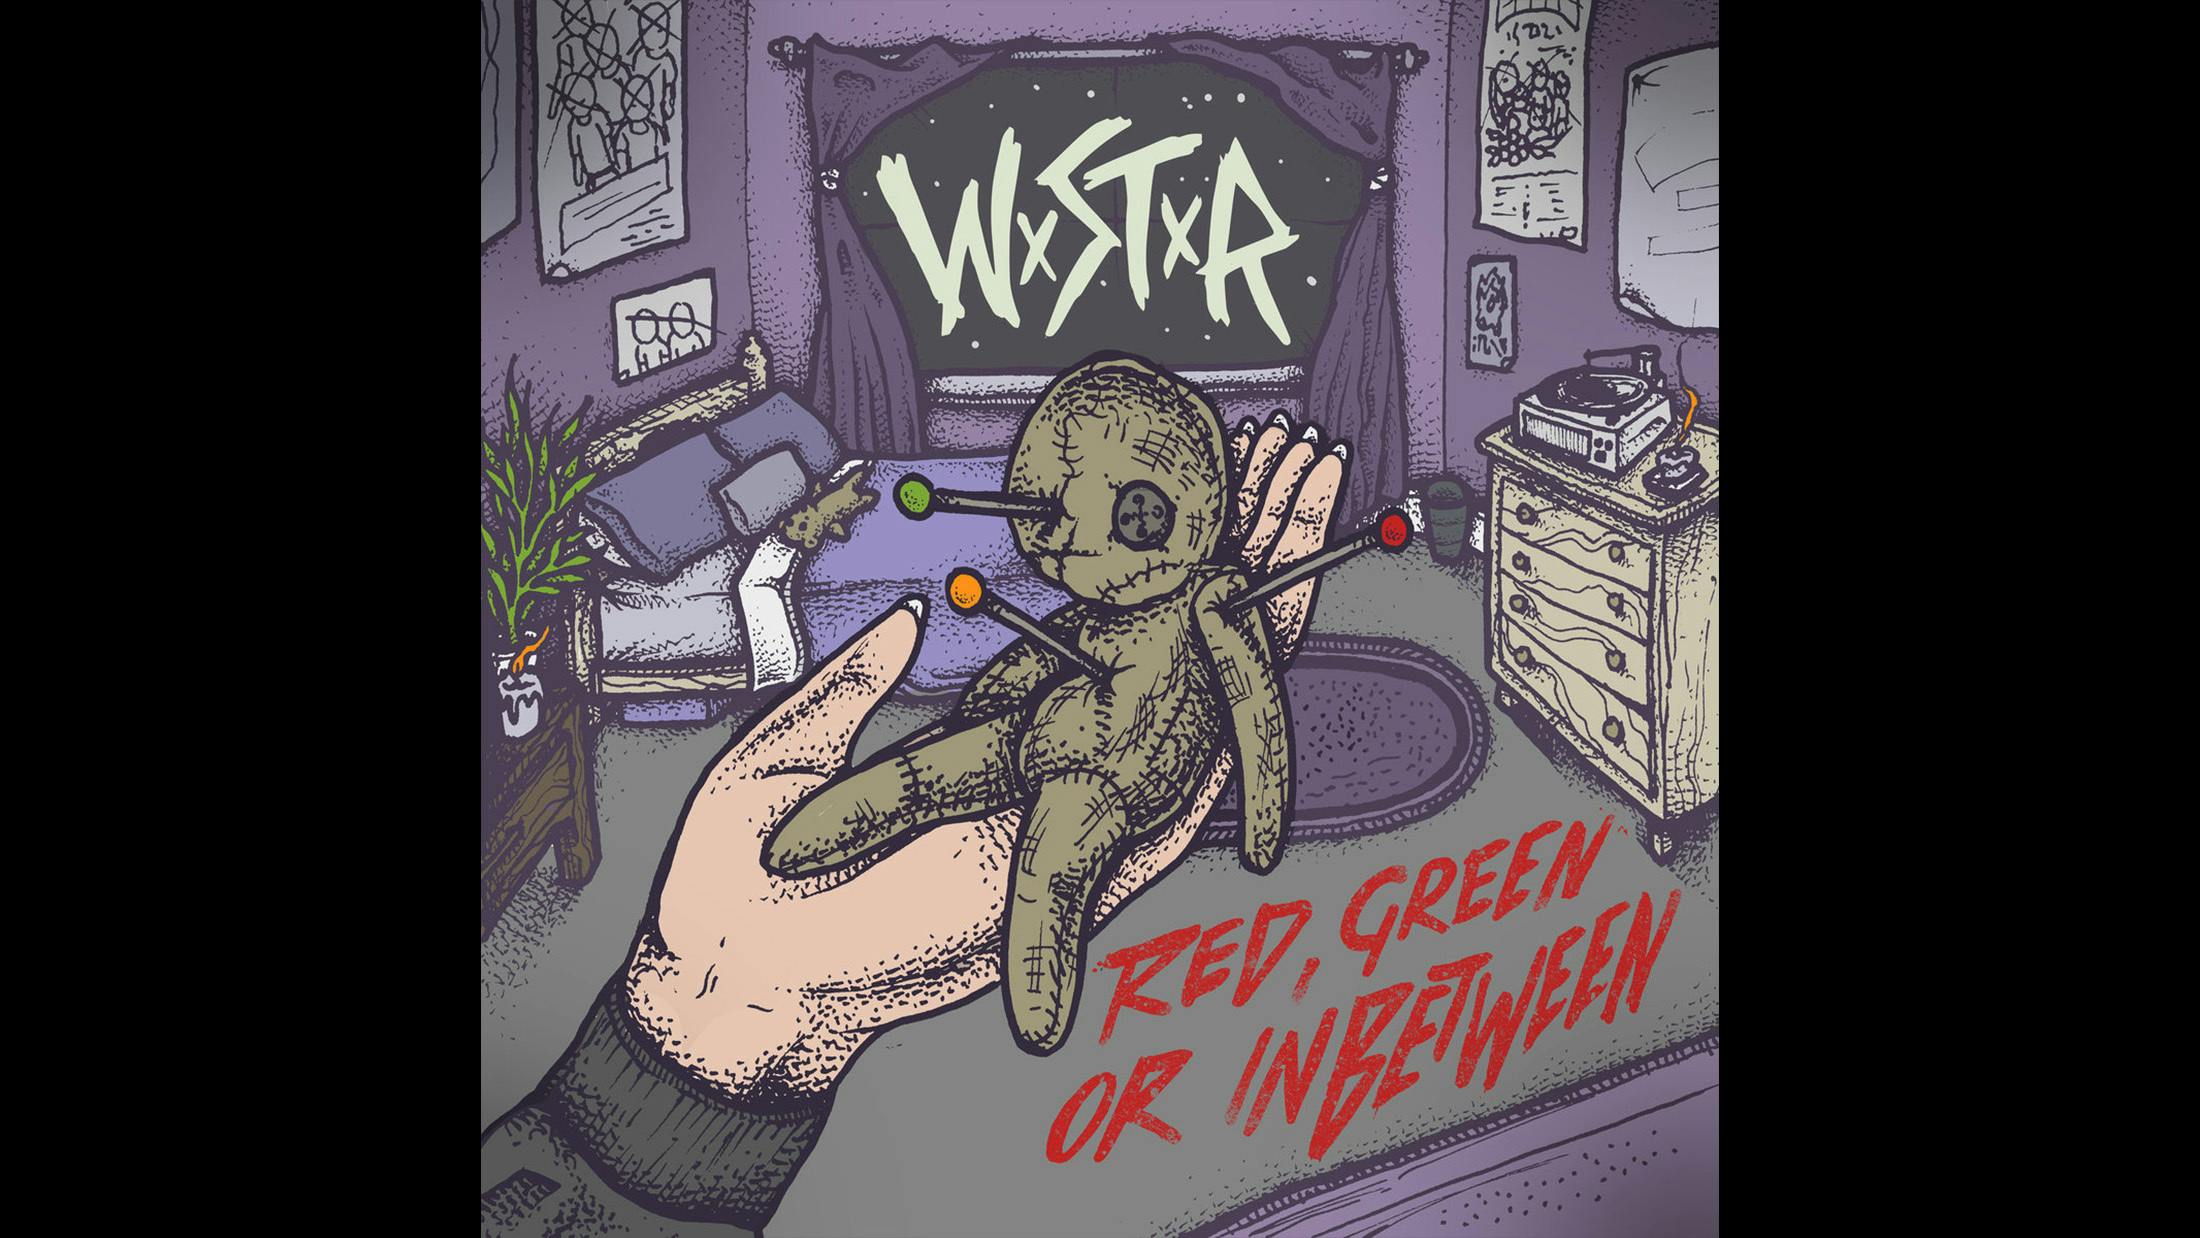 Aside from that fact that, here and there, they sound a bit too much like Neck Deep – vocalist Sammy Clifford’s melodies are almost indistinguishable from Ben Barlow at times – WSTR’s debut full-length is a brilliant example of fun-loving pop punk. Catchy jams such as Footprints and Eastbound & Down are made for the Slam Dunk masses, while WSTR also dabble in more lyrically sincere fare on Lonely Smiles and Punchline, with the former being the best song the band have put their name to. Expect the Liverpool gang to join the ranks of the British pop-punk giants in no time.